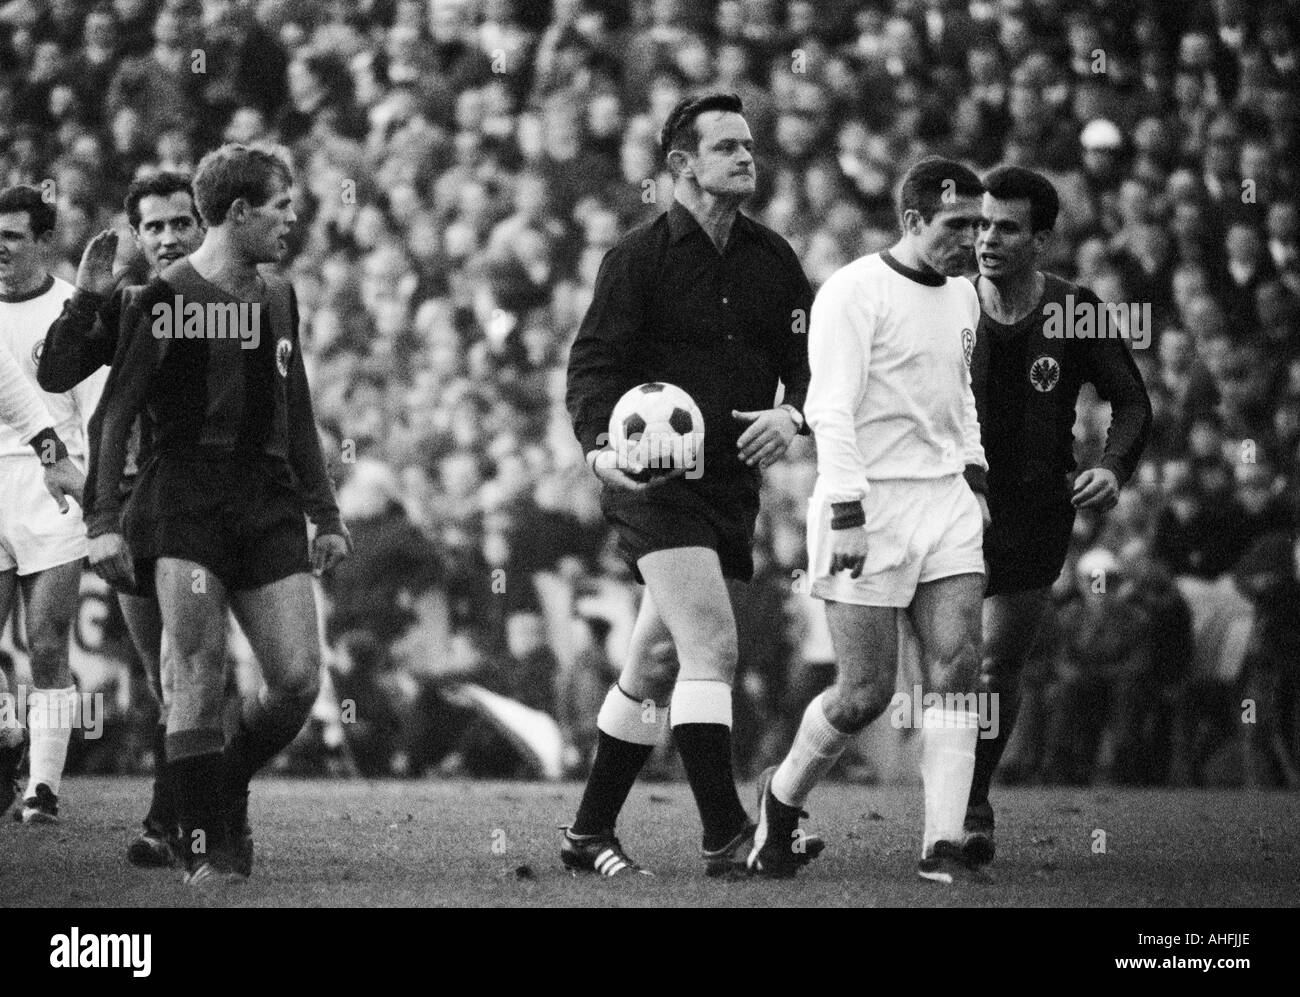 football, Bundesliga, 1966/1967, Stadium at the Hafenstrasse in Essen, Rot-Weiss Essen versus Eintracht Frankfurt 1:1, scene of the match, Frankfurt players do not agree to a decision of the referee and try to discuss, f.l.t.r. Willi Lippens (RWE), Wolfga Stock Photo